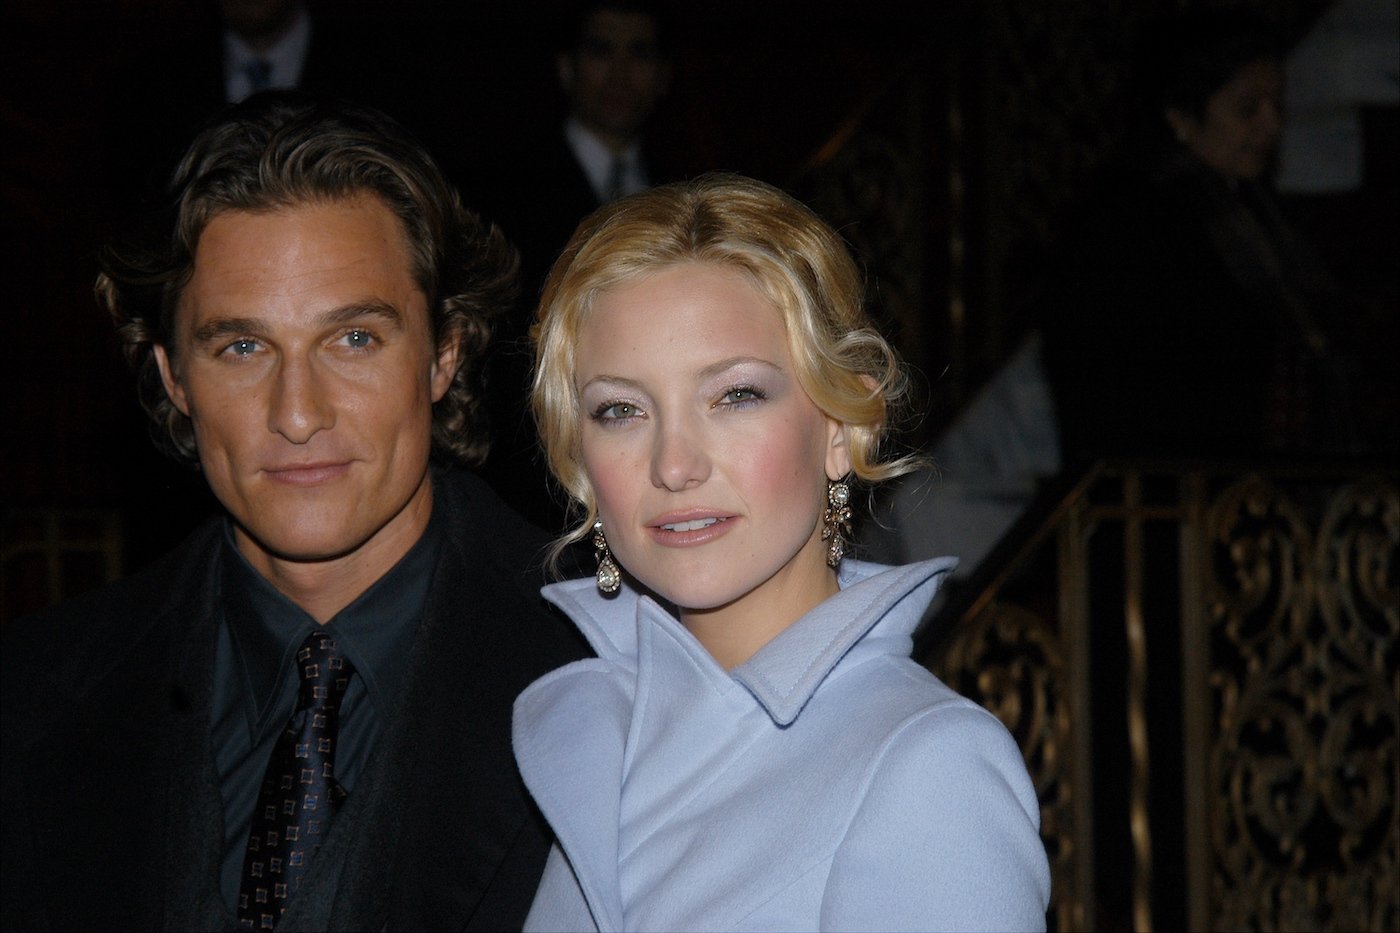 Matthew McConaughey and Kate Hudson at the screening of 'How to Lose a Guy in 10 Days'